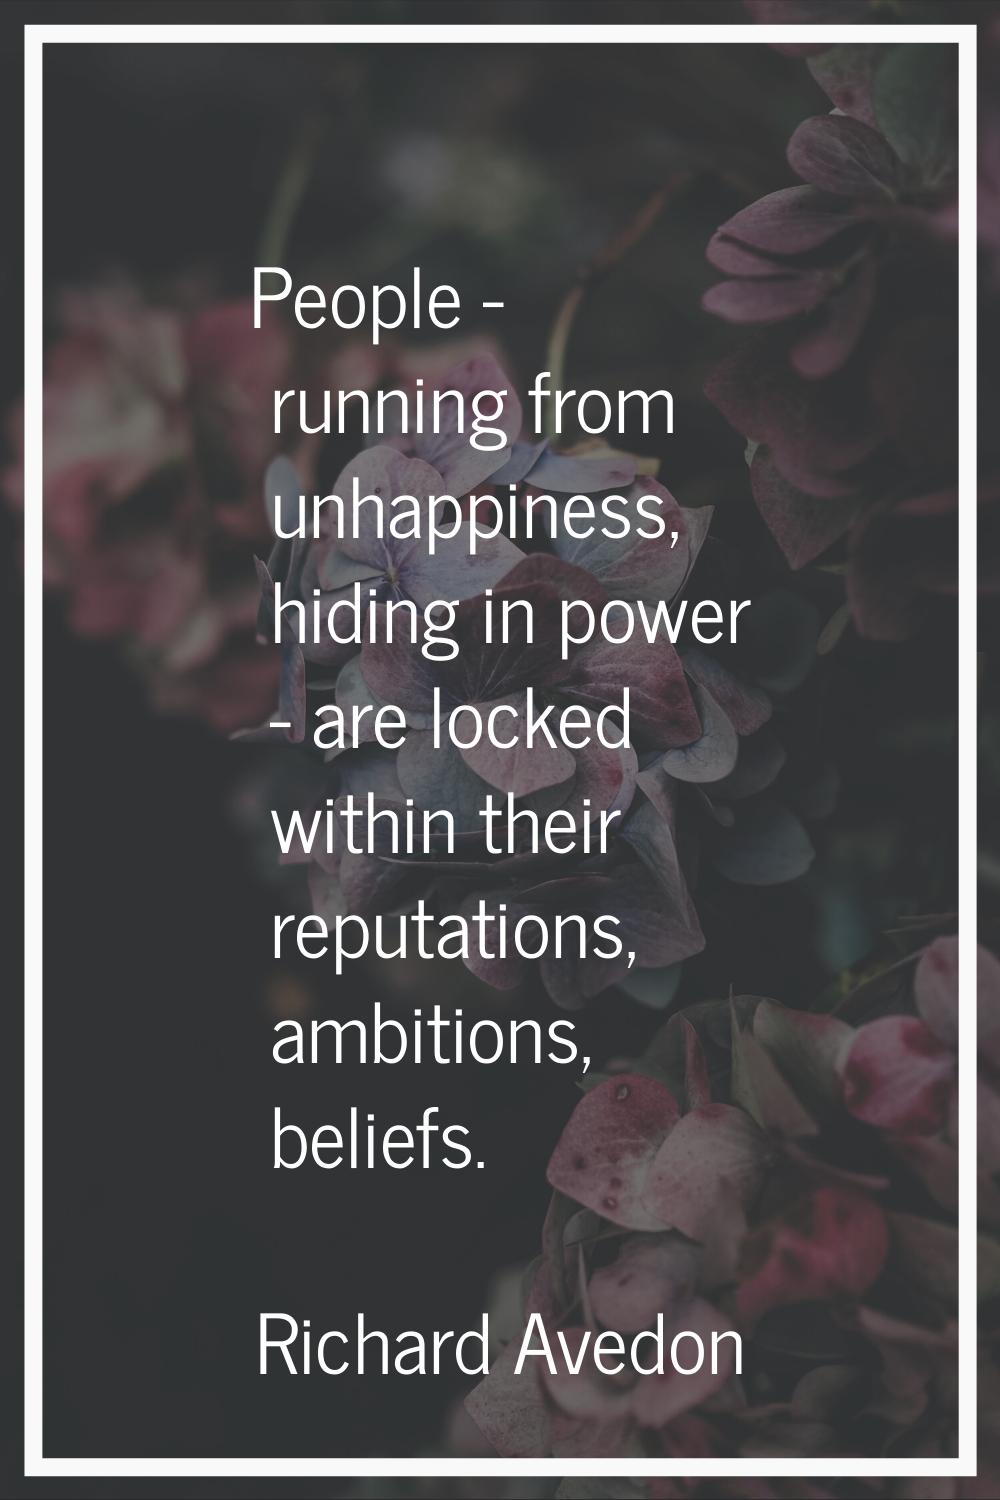 People - running from unhappiness, hiding in power - are locked within their reputations, ambitions